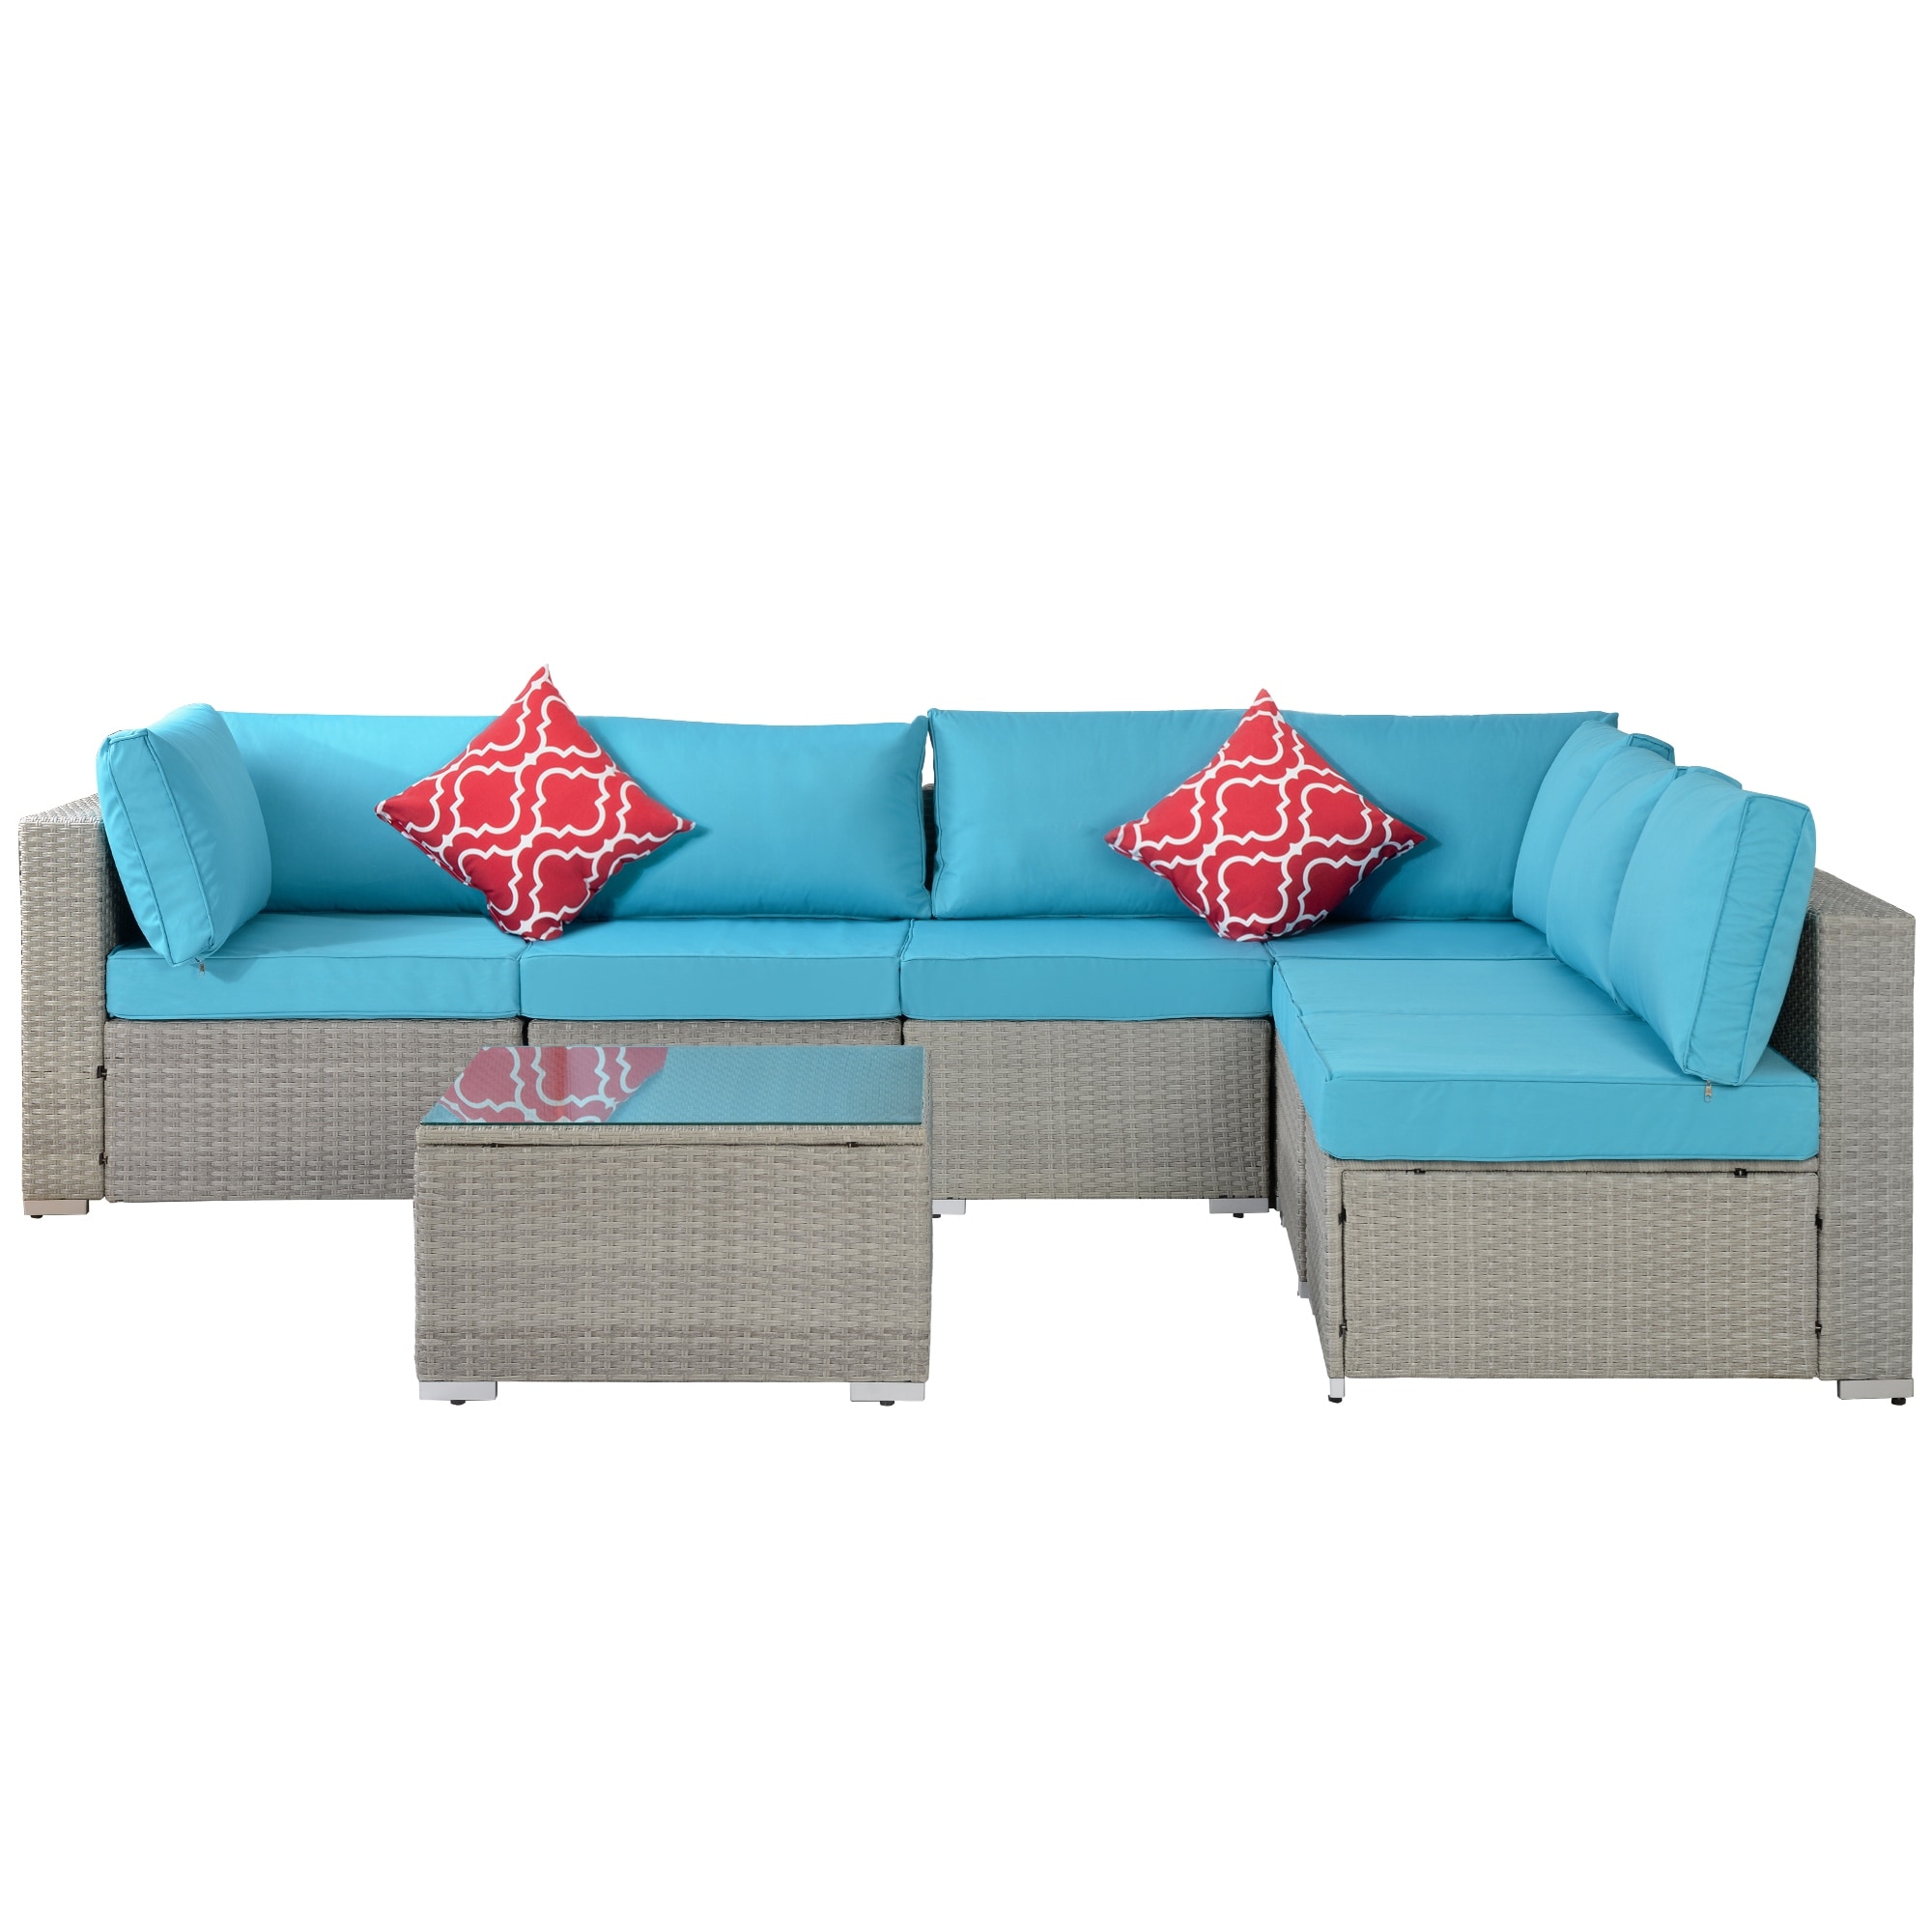 7-piece Pe Rattan Wicker Sectional Cushioned Sofa Sets With 2 Pillows And Coffee Table